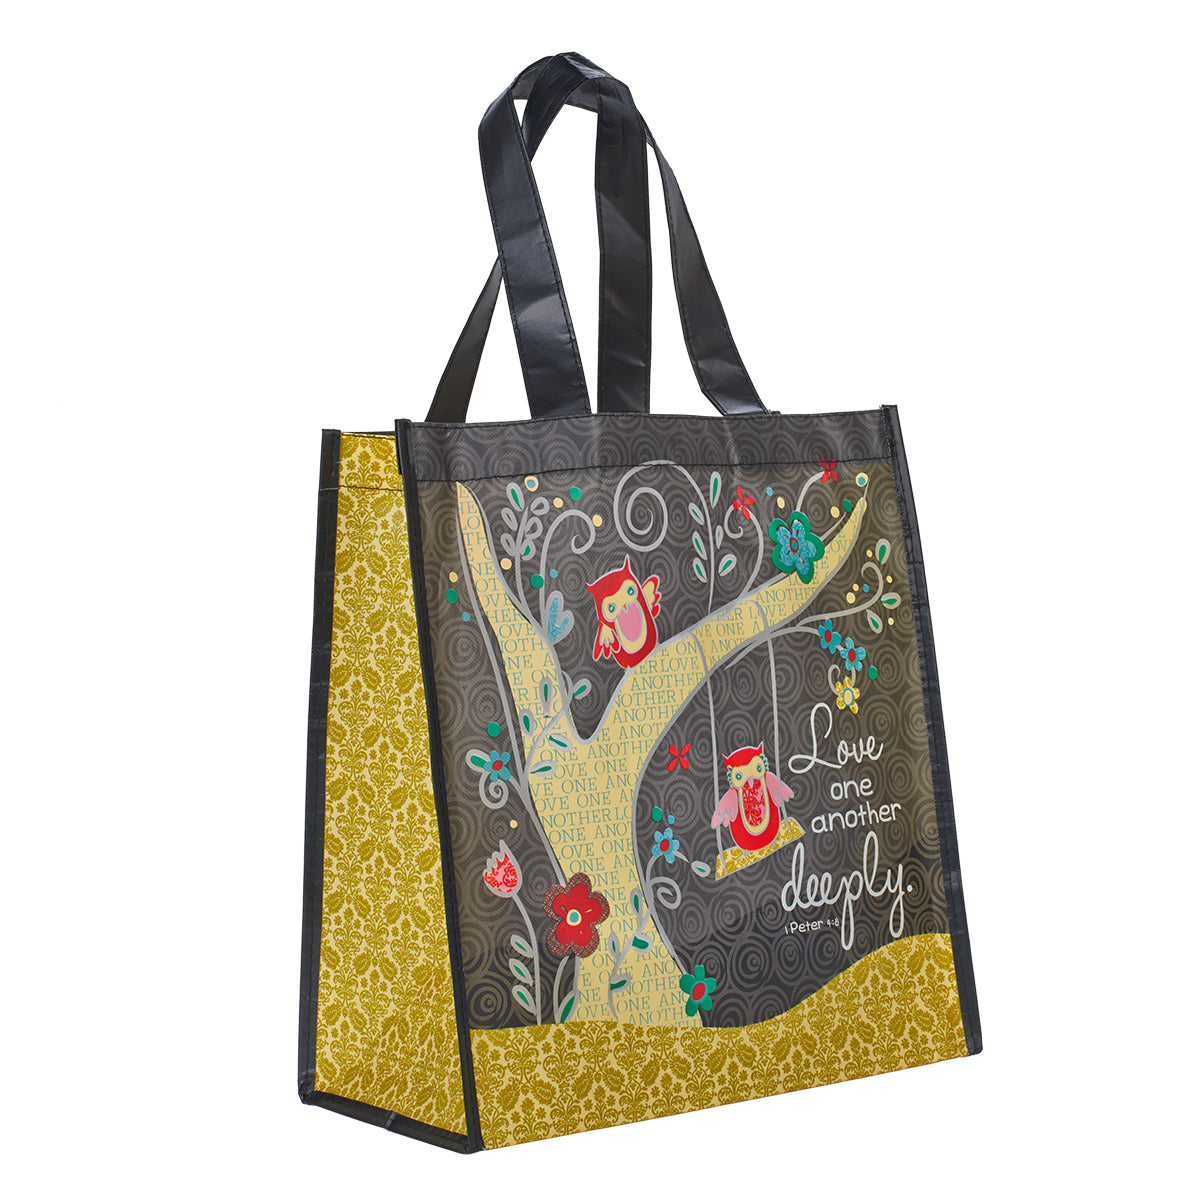 Image of Love Deeply Shopper Bag other